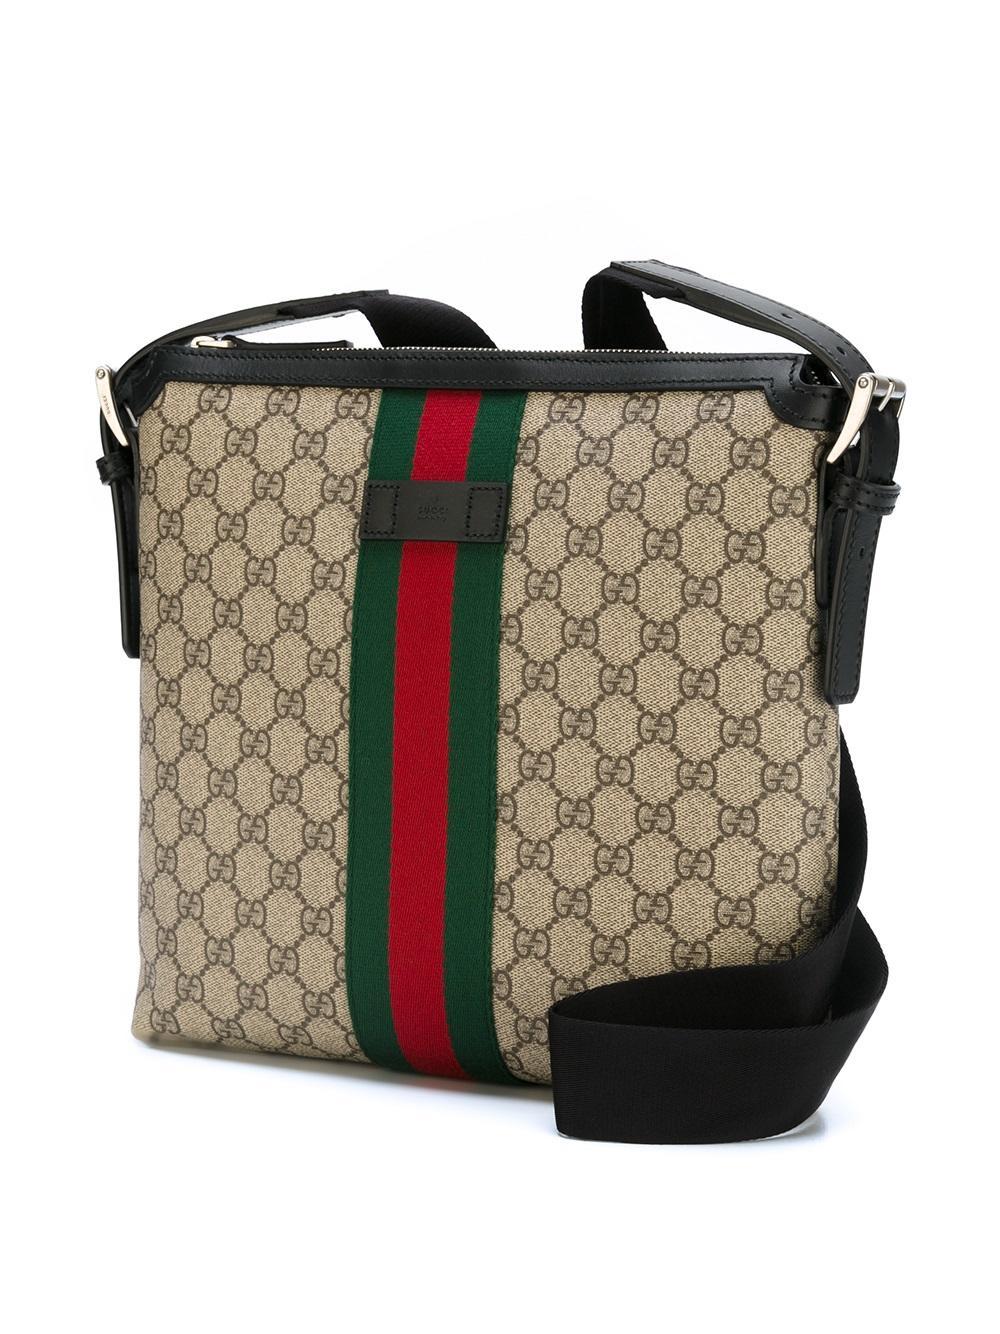 Lyst - Gucci Gg Supreme Messenger Bag With Web Detail